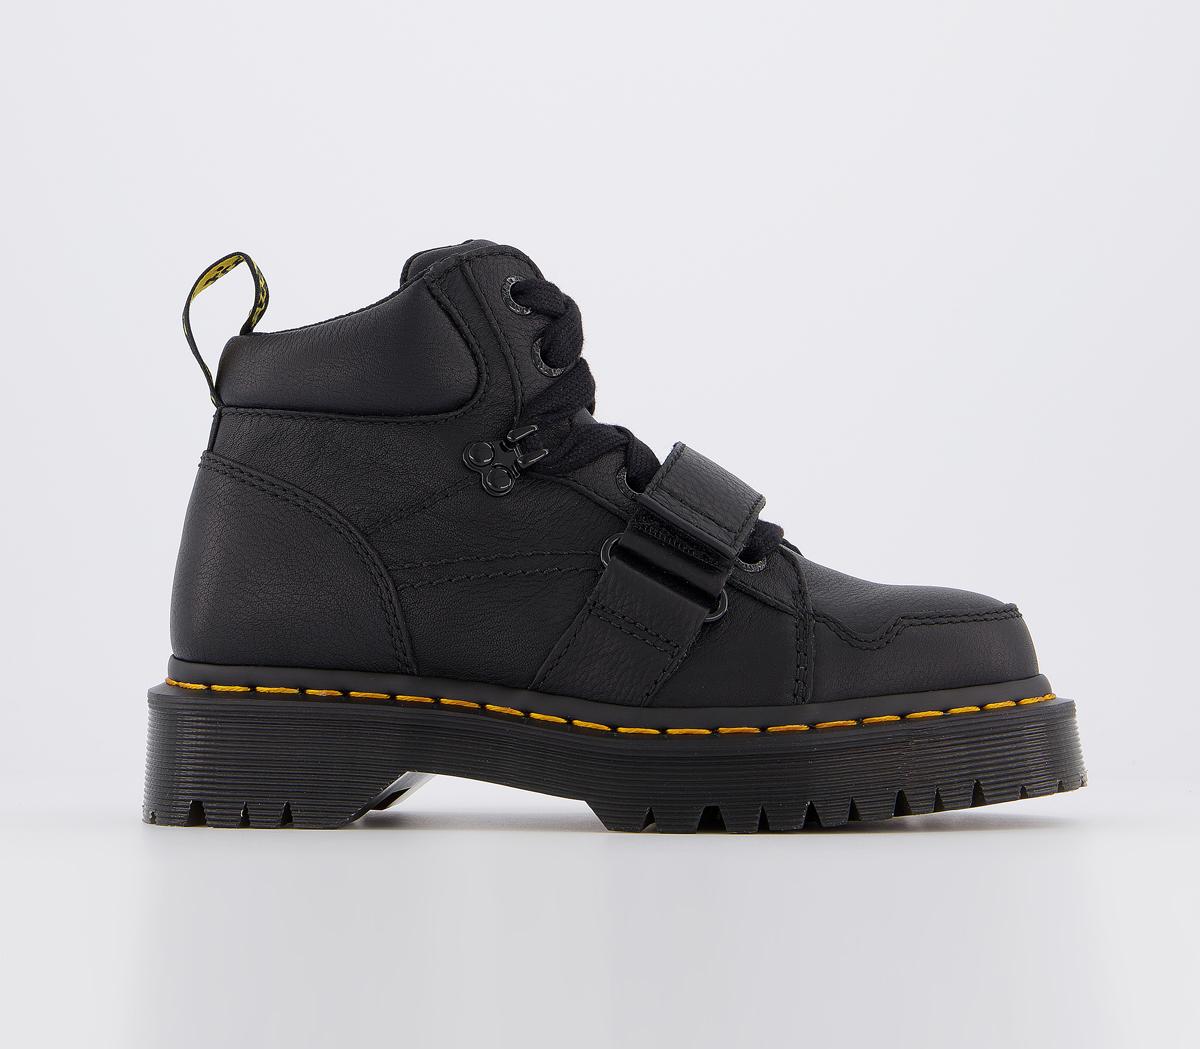 Dr. Martens Zuma Boot Black - Ankle Boots